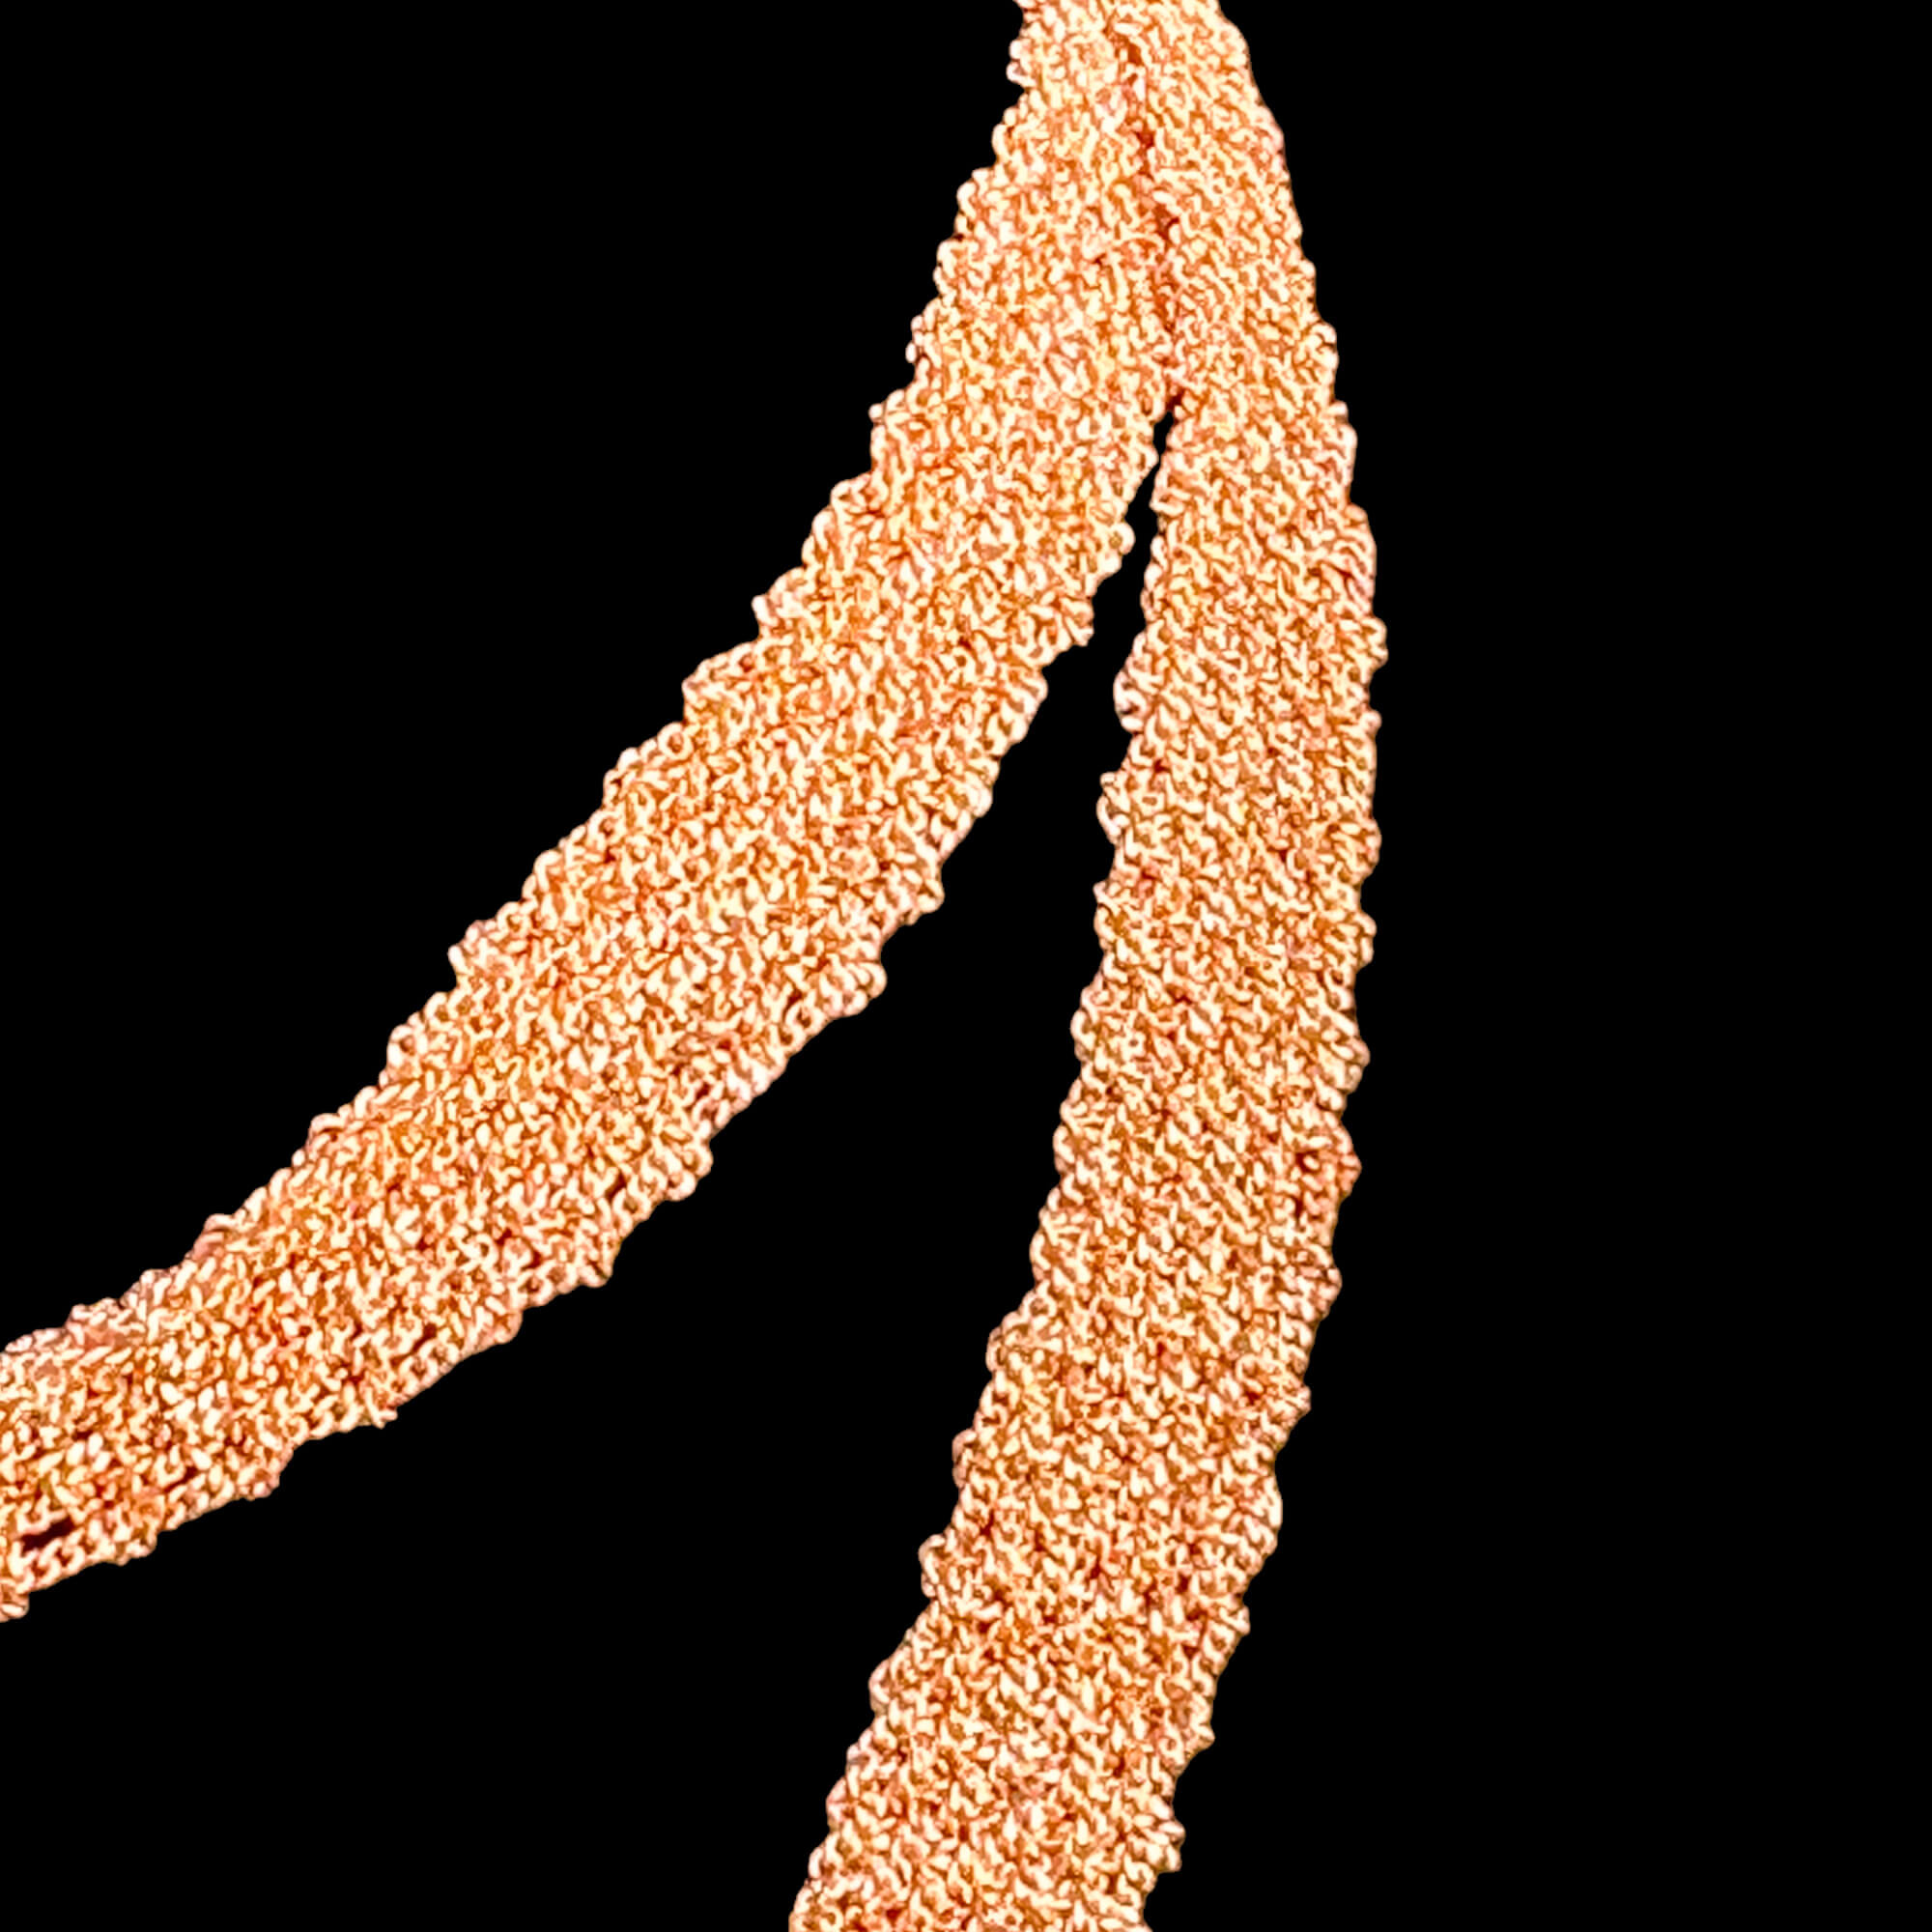 Rosé scarf or interwoven chains